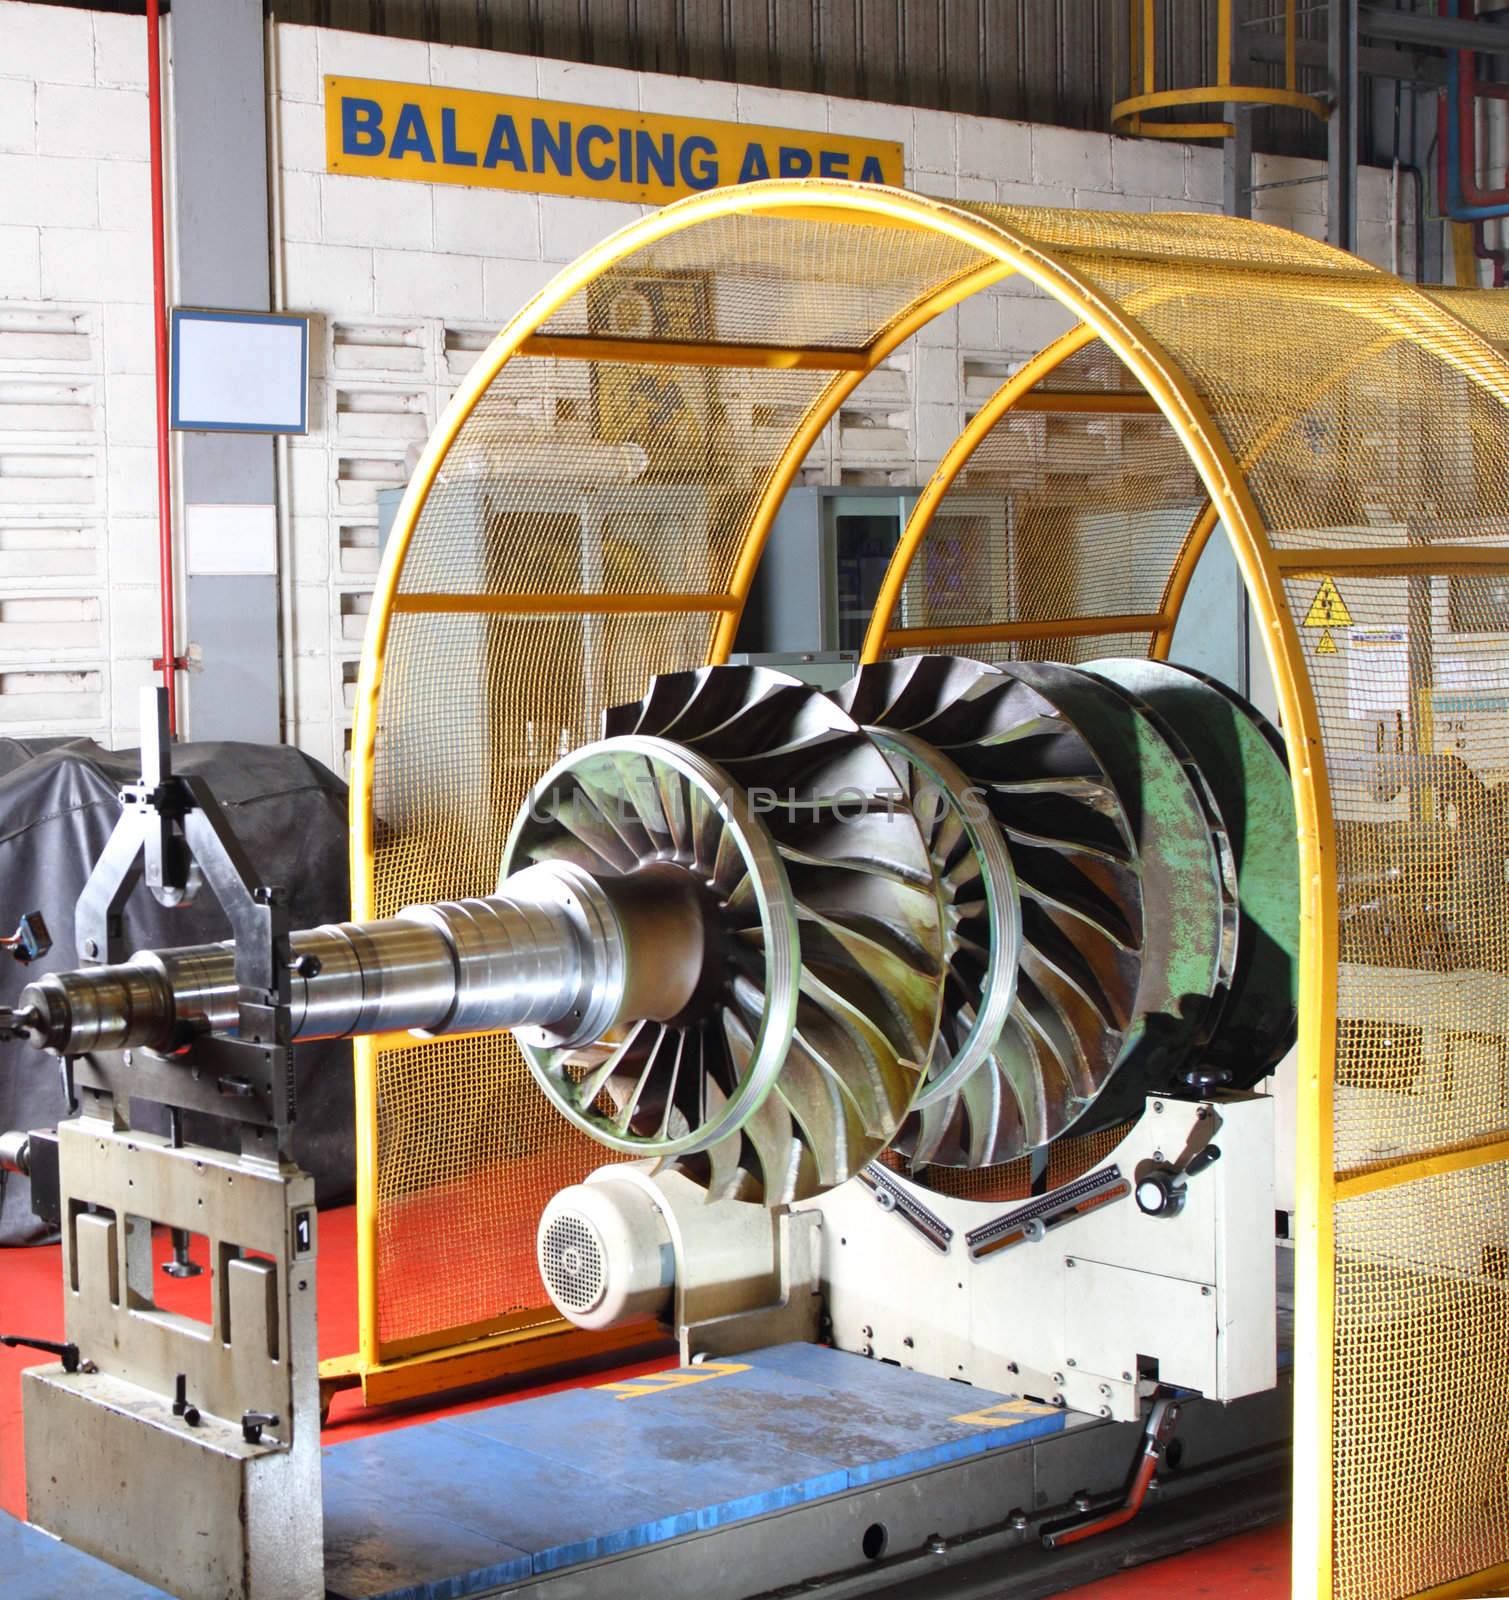 Balancing equipment in a factory workshop